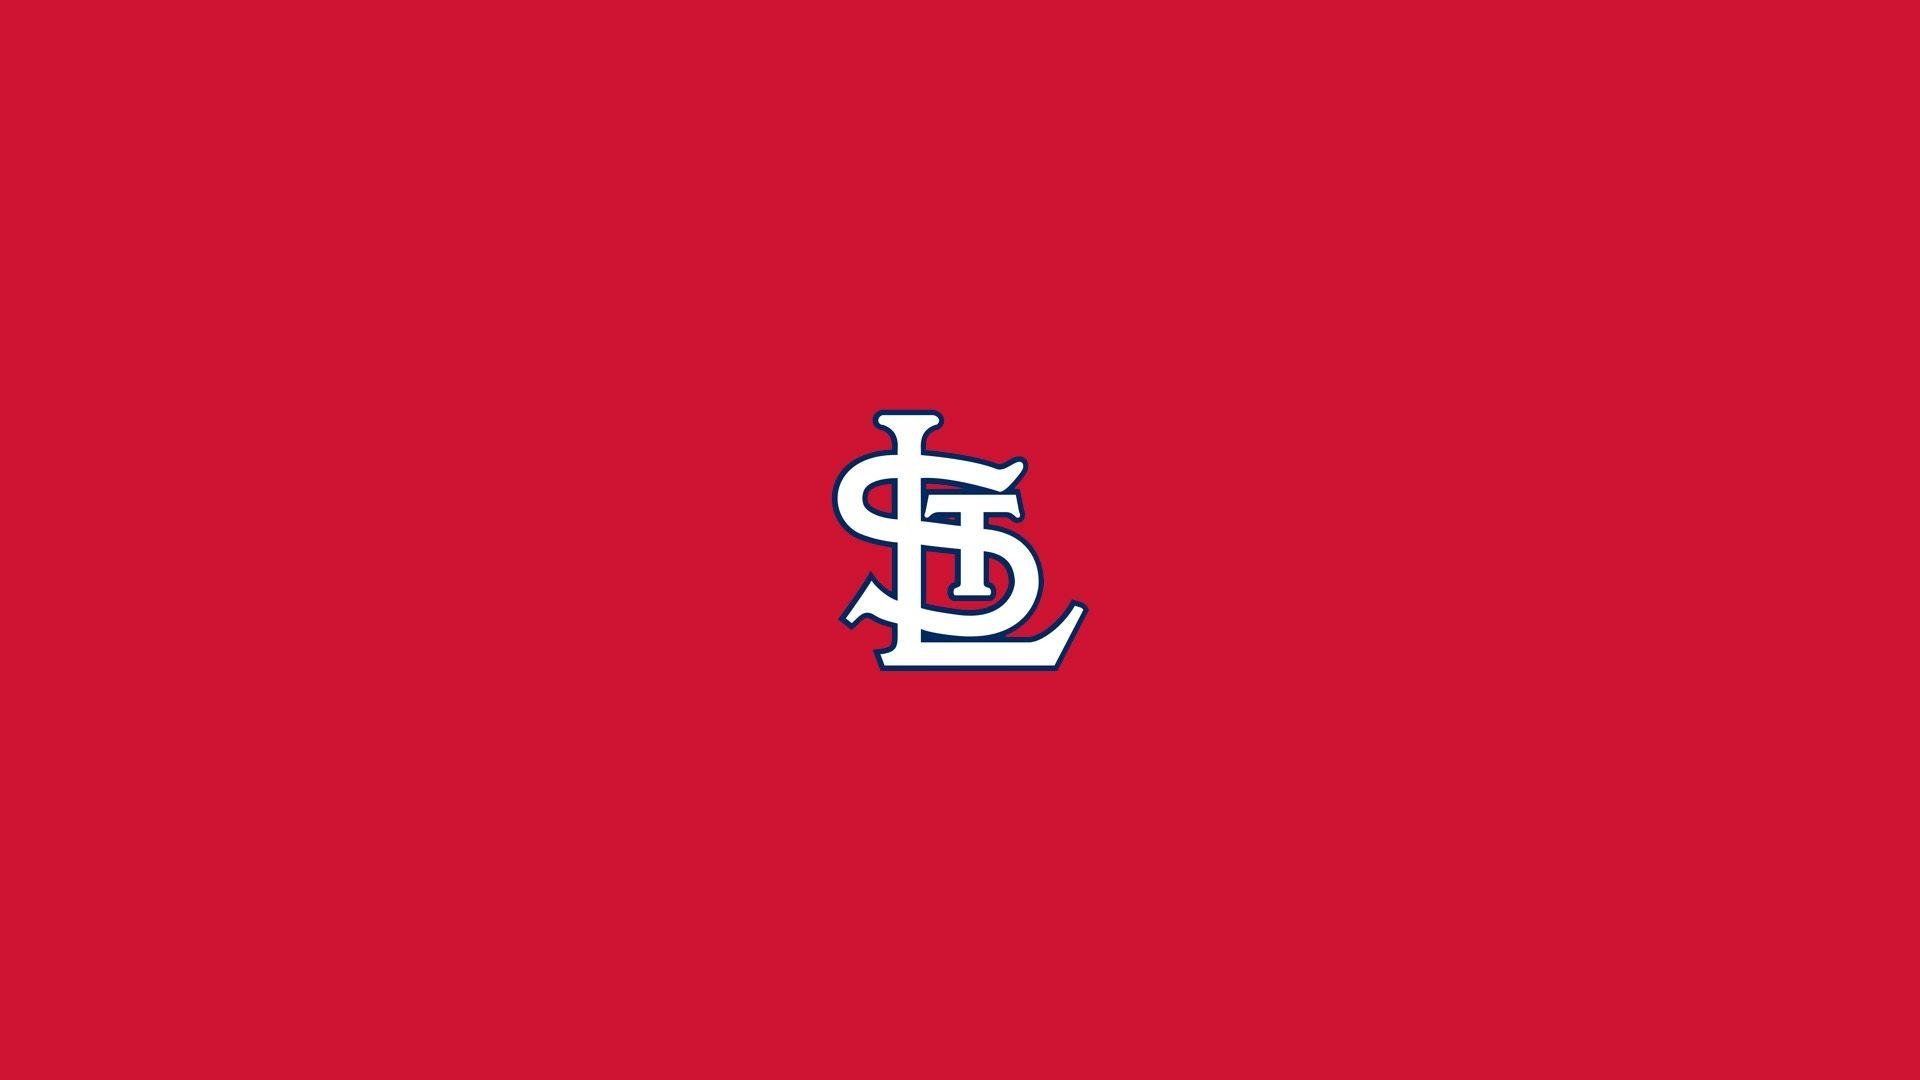 New St Louis Cardinals Phone Wallpaper FULL HD 1920×1080 For PC